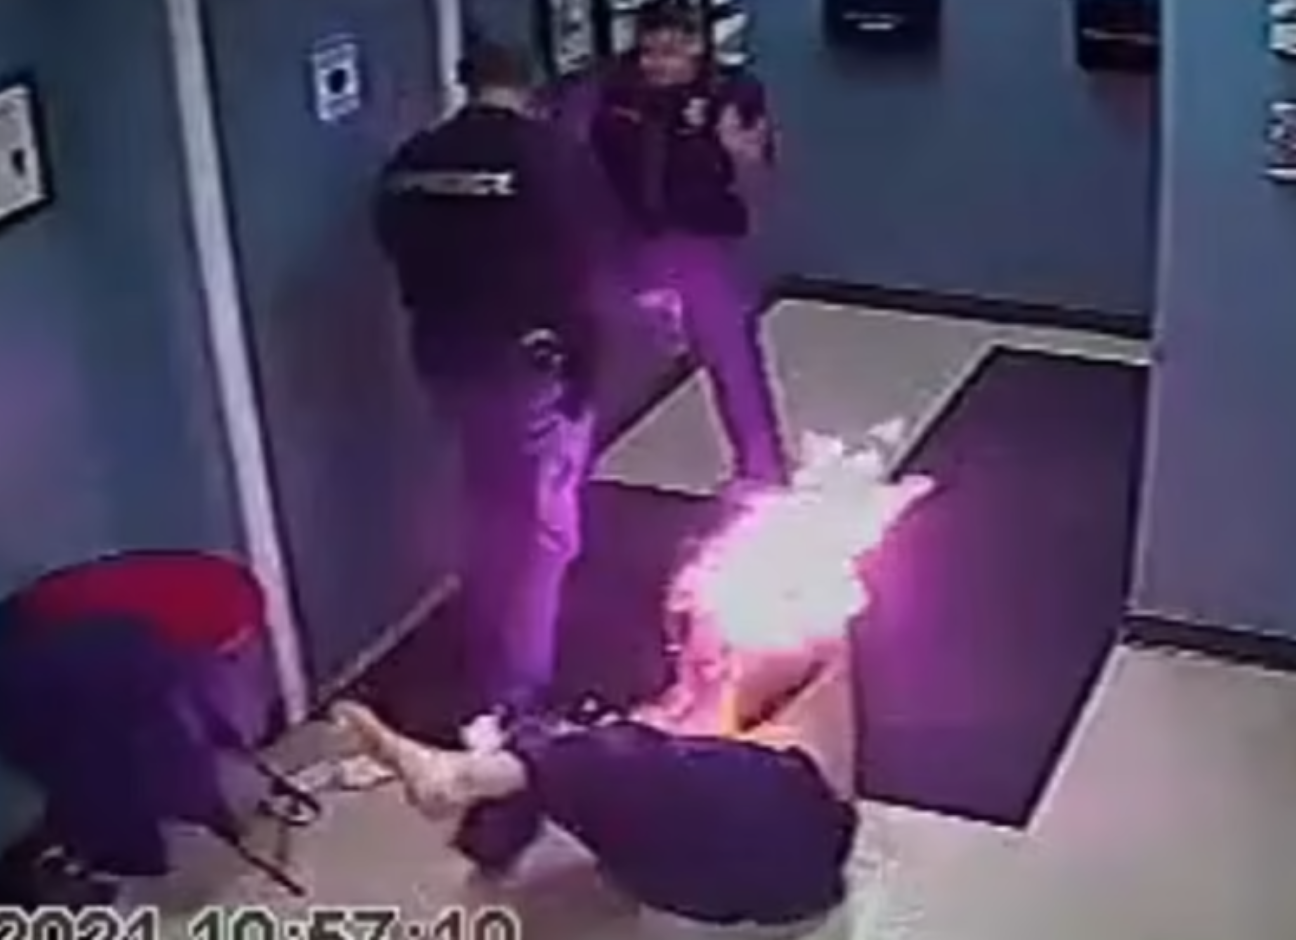 Meanwhile in Hand Sanitizer: Drunk Man Catches Fire After Getting Tased By Cops, Which Is Worse We Will Find Out Soon